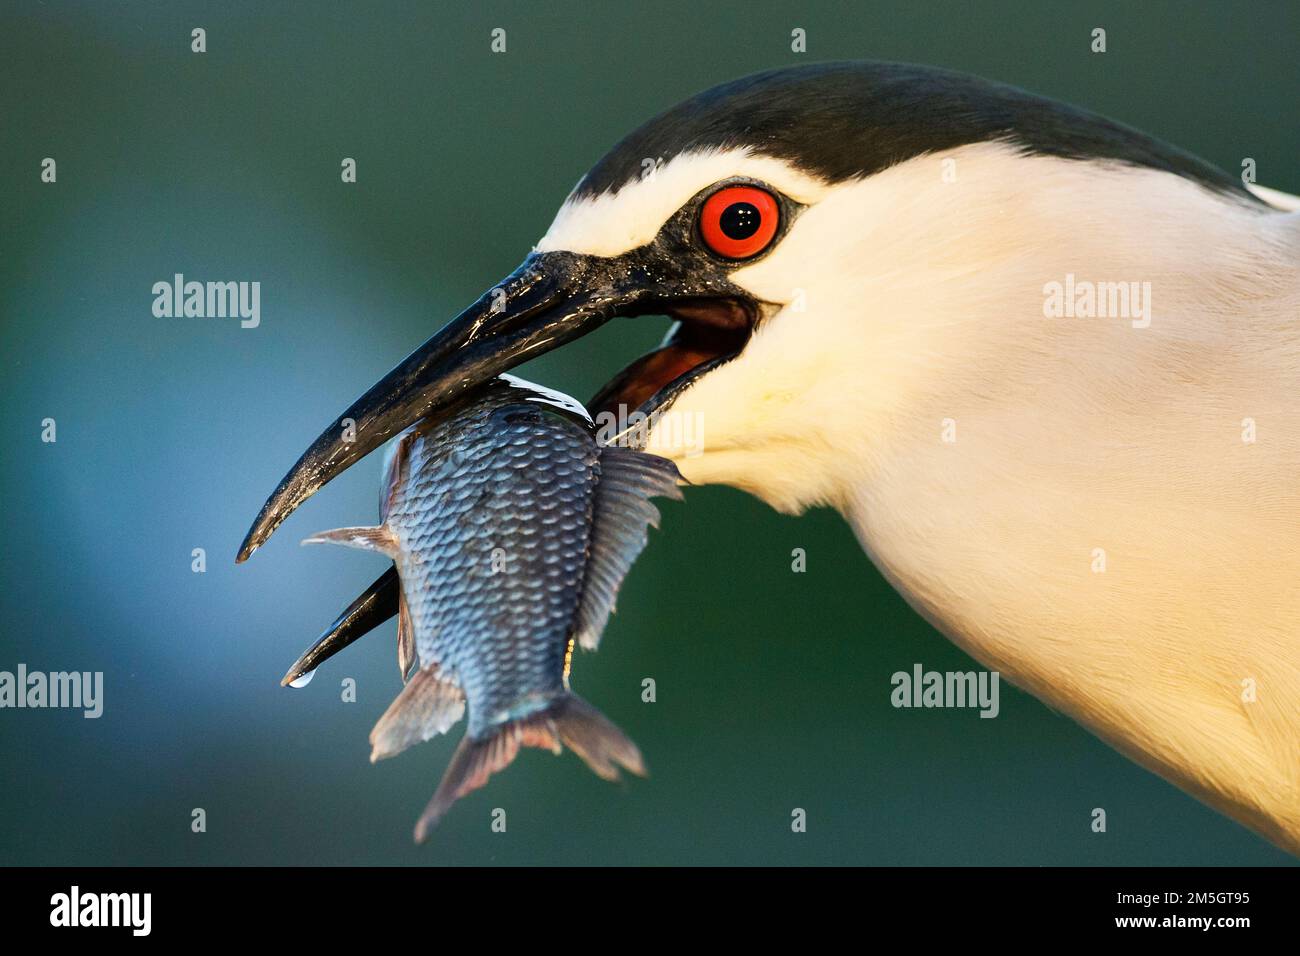 Adult Black-crowned Night Heron (Nycticorax nycticorax) carrying a big fish it its beak seen from up close in Hungary. Stock Photo